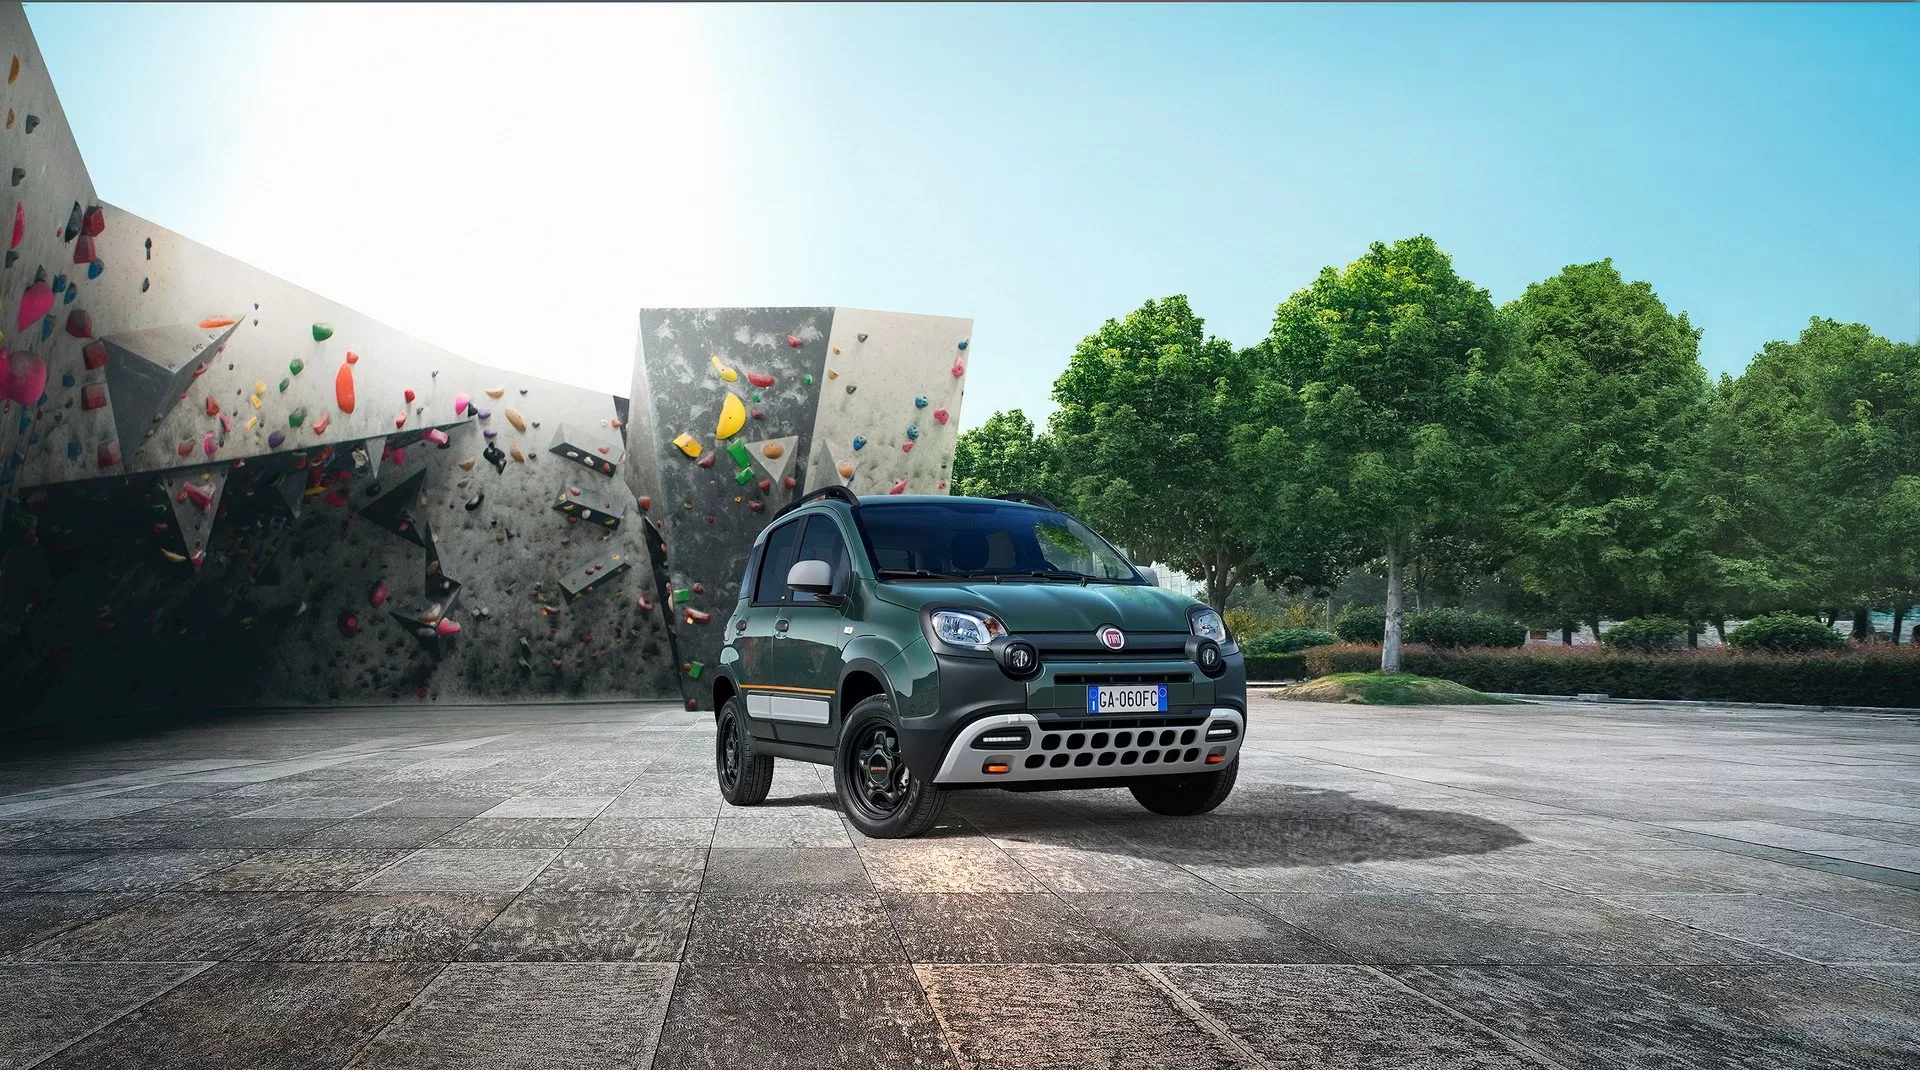 The new Fiat Panda is now called Pandina